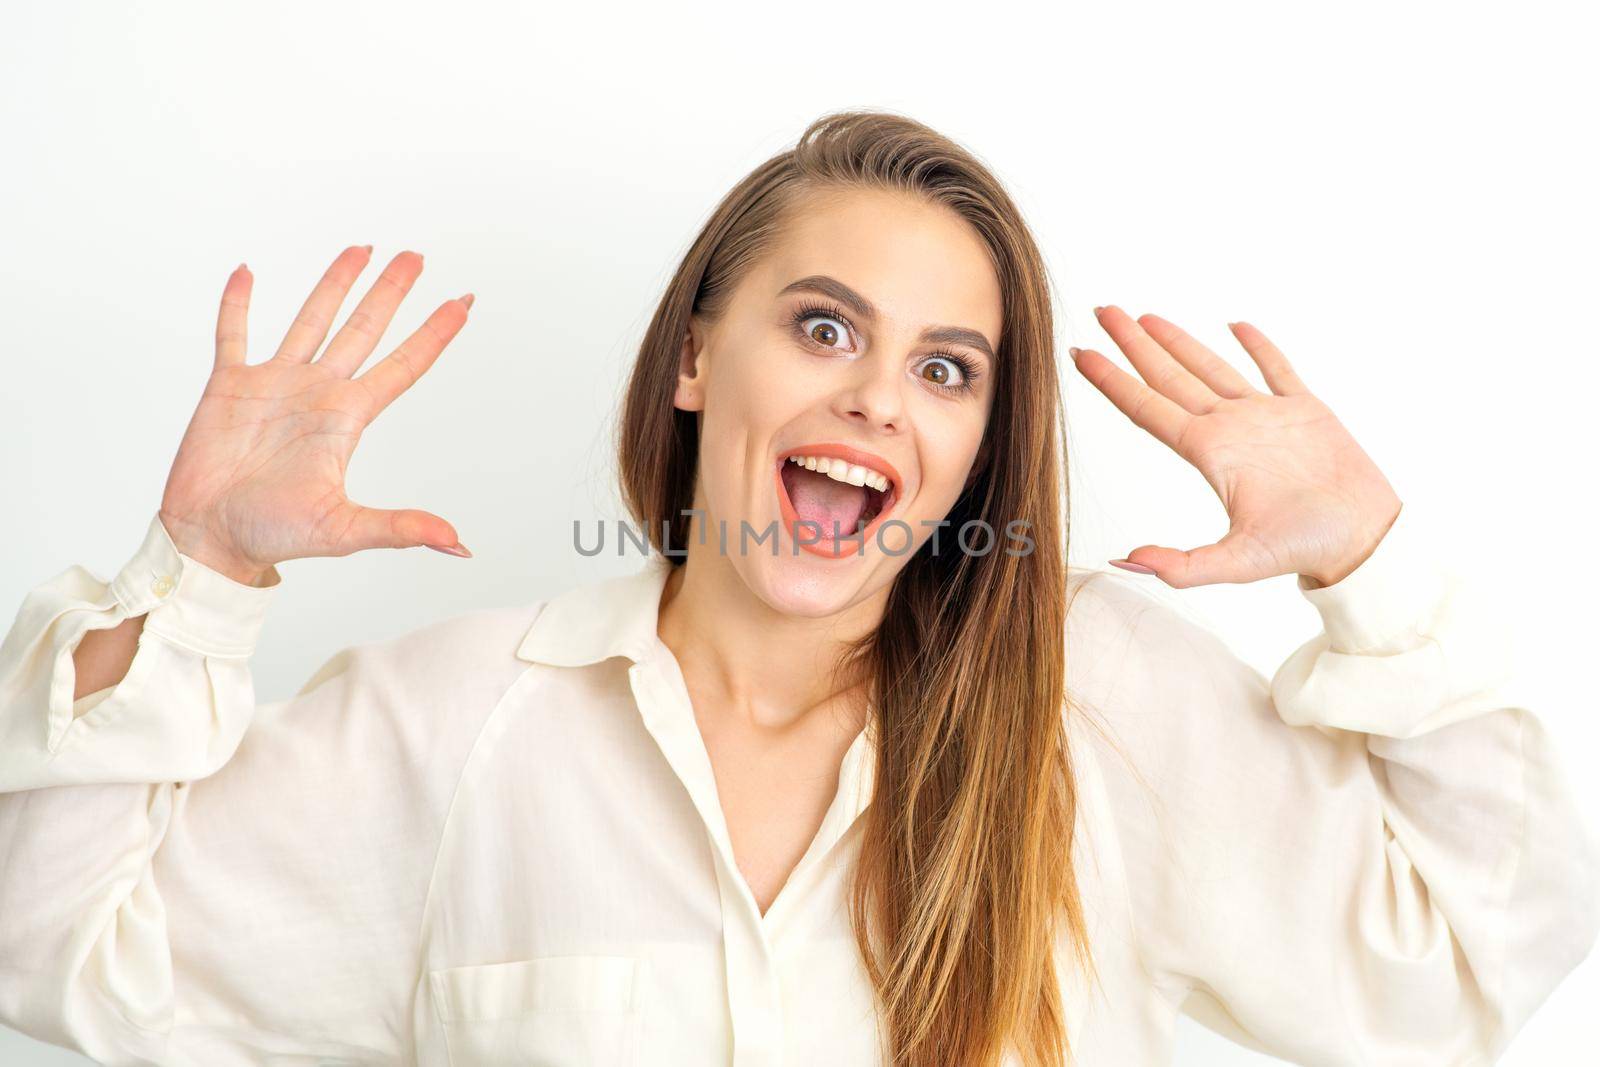 Portrait of young caucasian woman wearing white shirt raises hands and laughs positively with open mouth poses against a white background